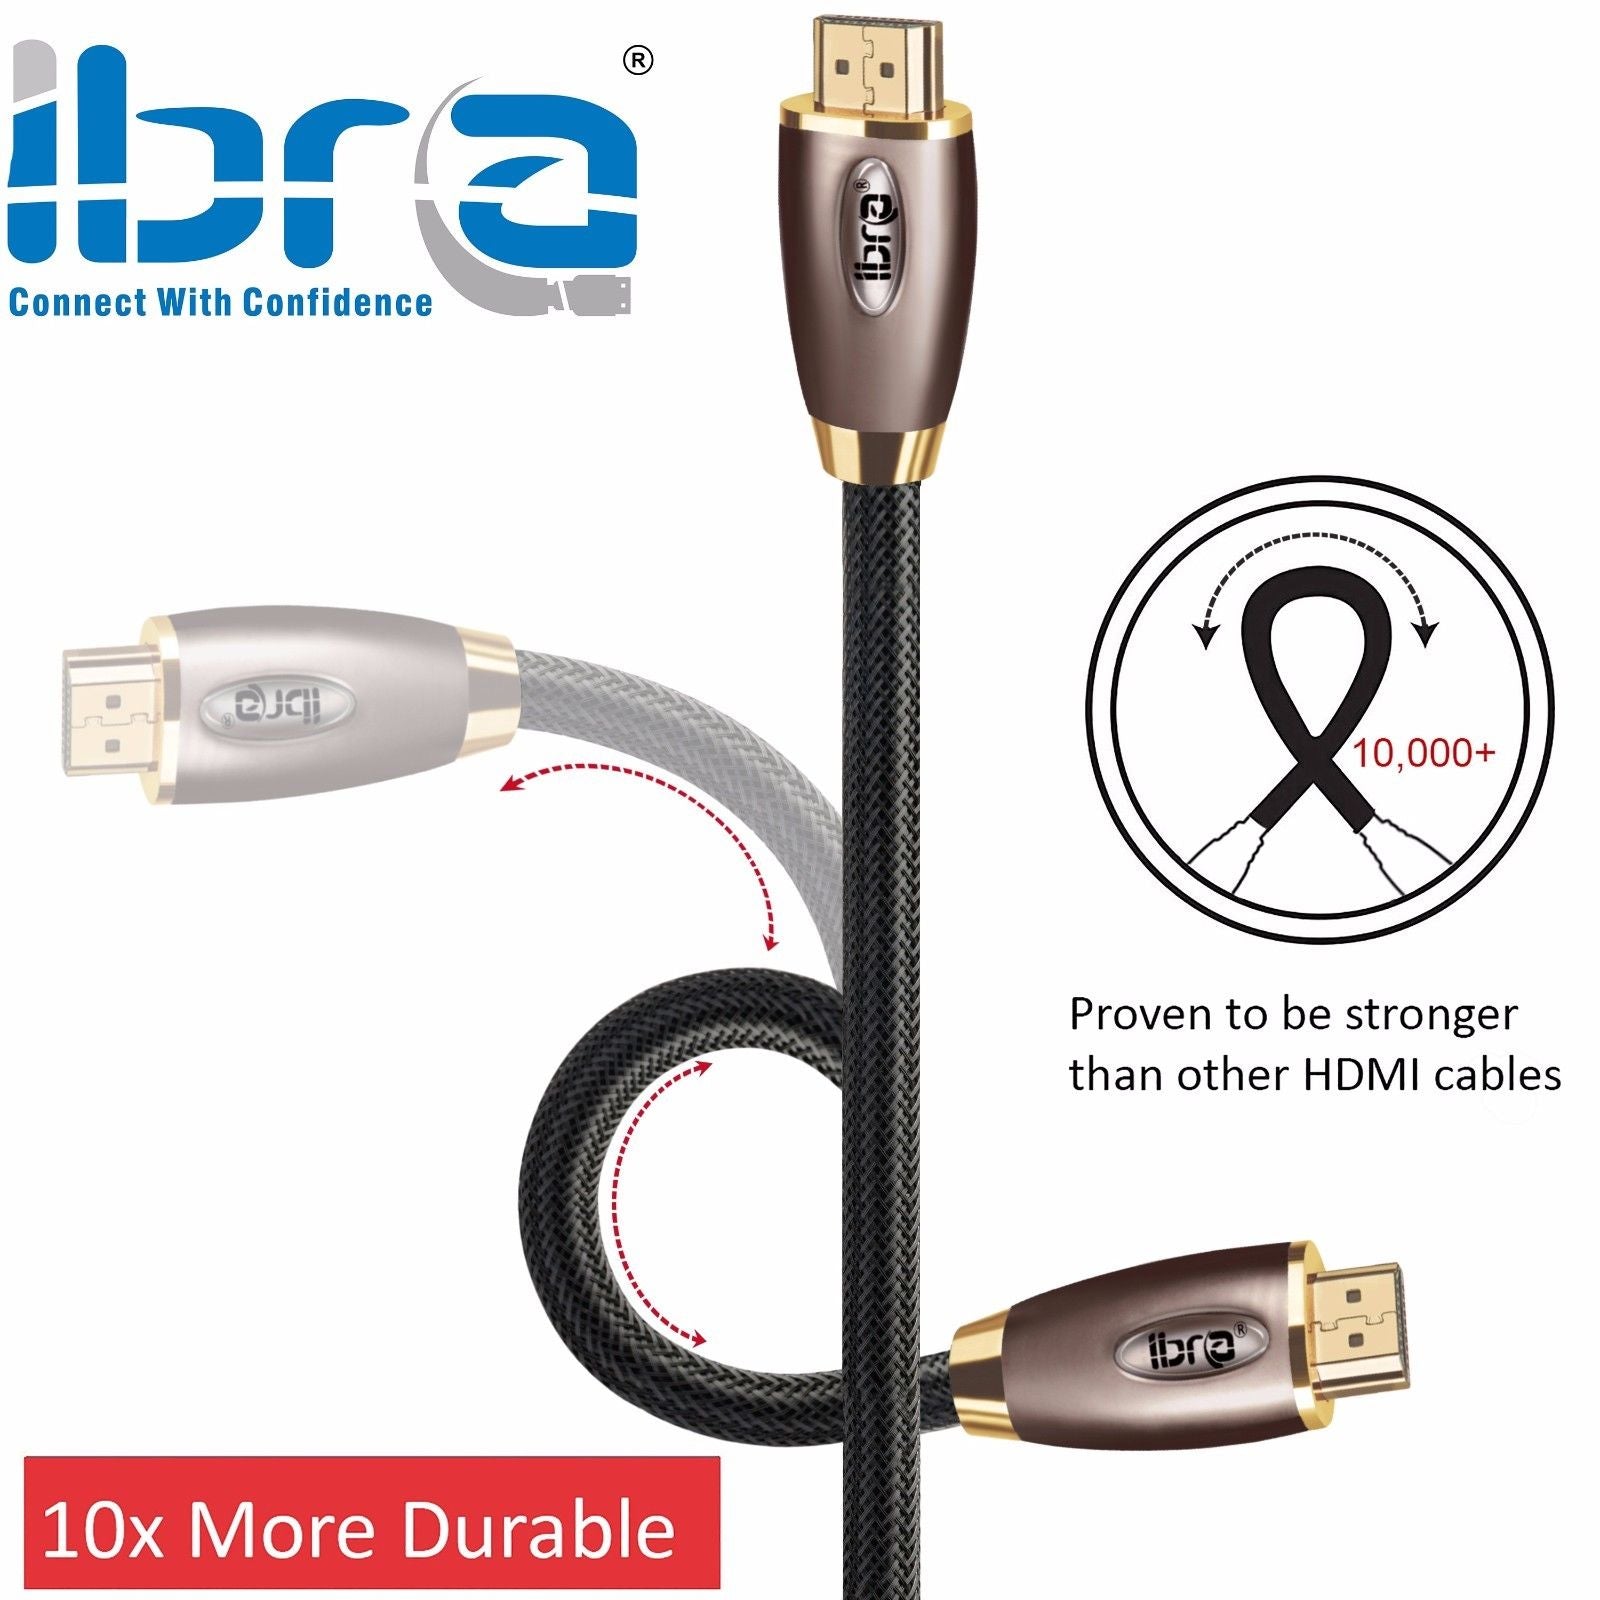 HDMI Cable 9M - 4K UHD HDMI 2.0(4K@60Hz) Ready -18Gbps-28AWG Braided Cord -Gold Plated Connectors -Ethernet,Audio Return -Video 4K 2160p,HD 1080p,3D -Xbox PlayStation PS3 PS4 PC Apple TV -IBRA RED